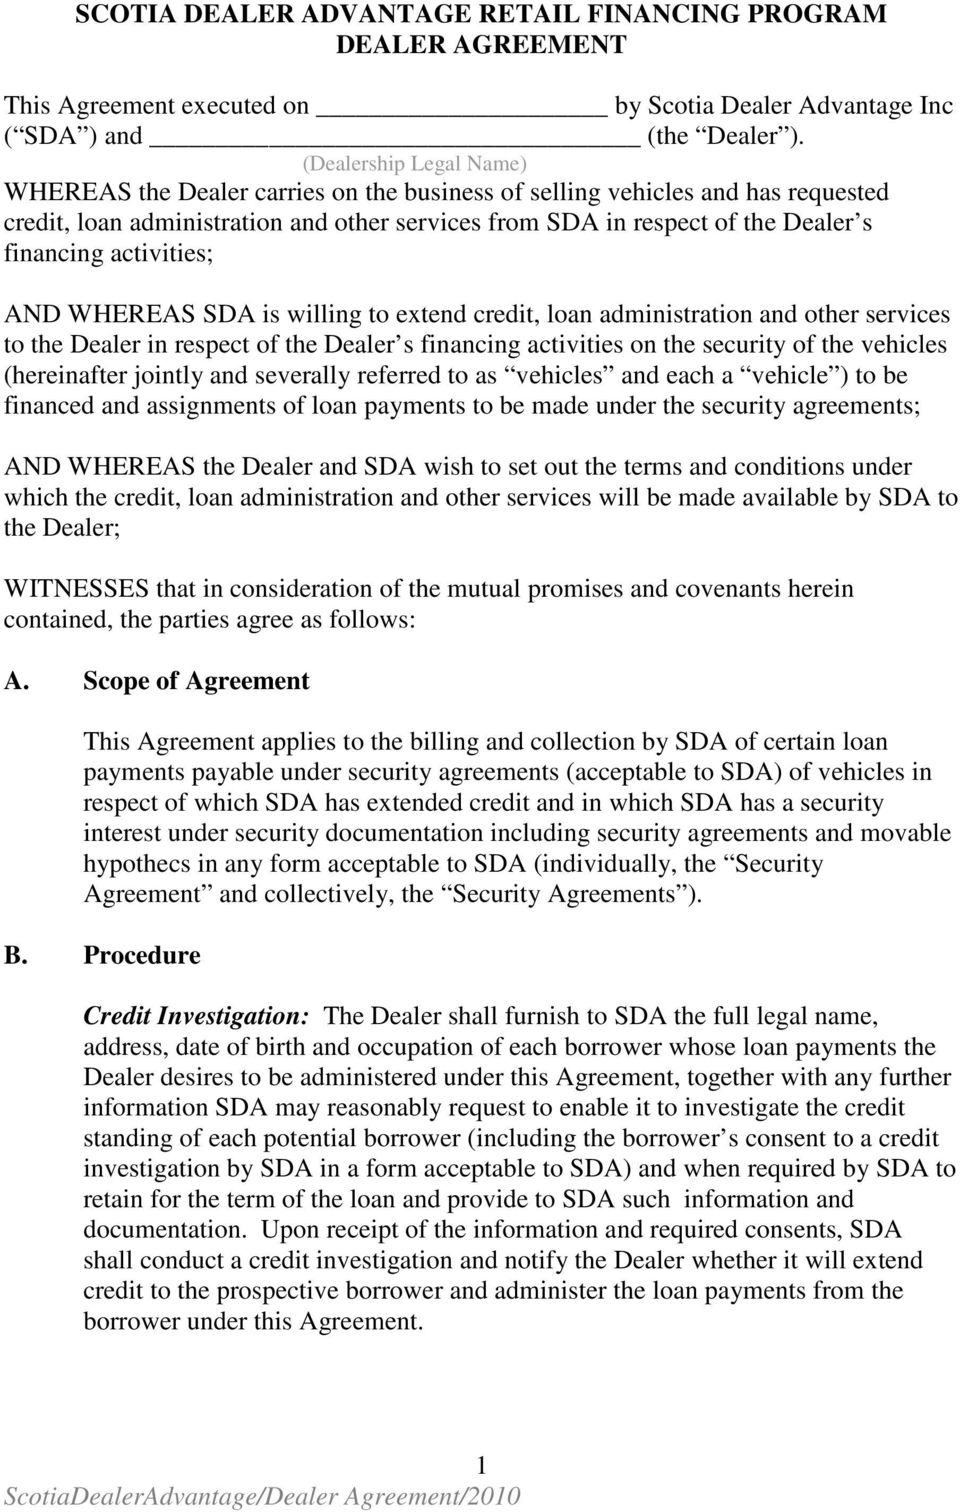 activities; AND WHEREAS SDA is willing to extend credit, loan administration and other services to the Dealer in respect of the Dealer s financing activities on the security of the vehicles